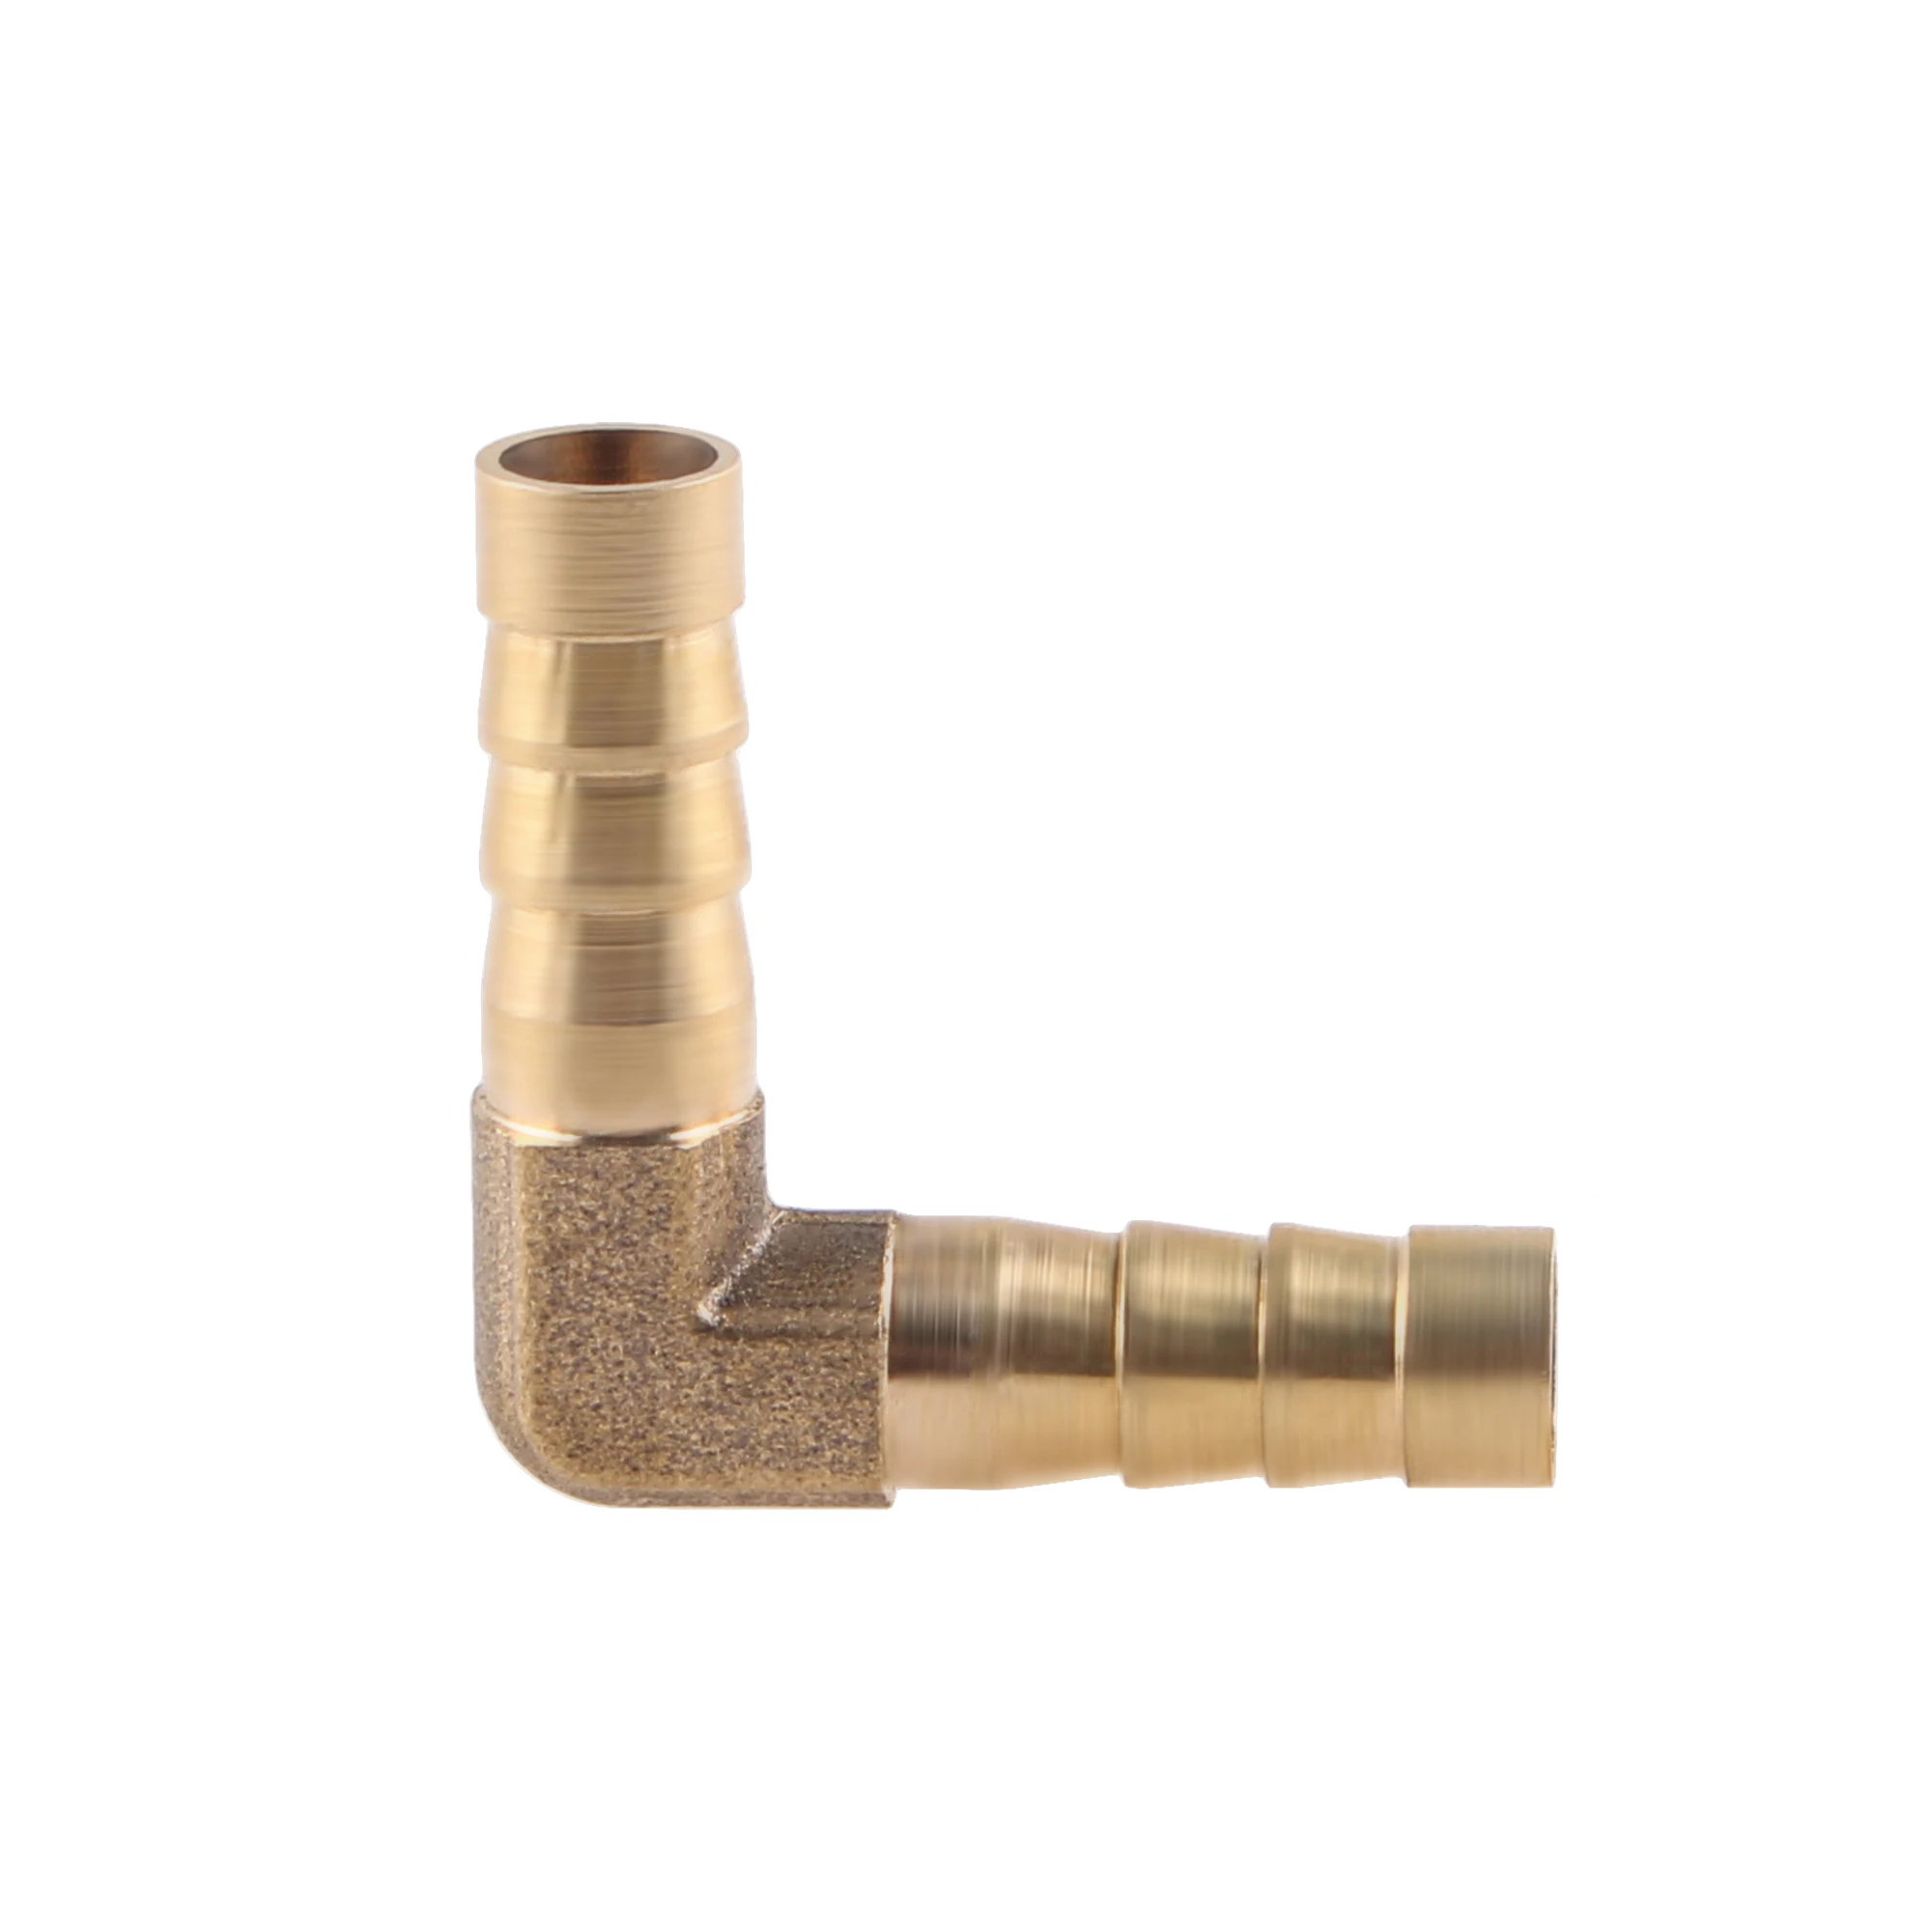 Brass Pipe Fitting Elbow Hose Barb 4mm 5mm 6mm 8mm 10mm 12mm 14mm 16mm Hose Copper Barbed Coupler Connector Adapter